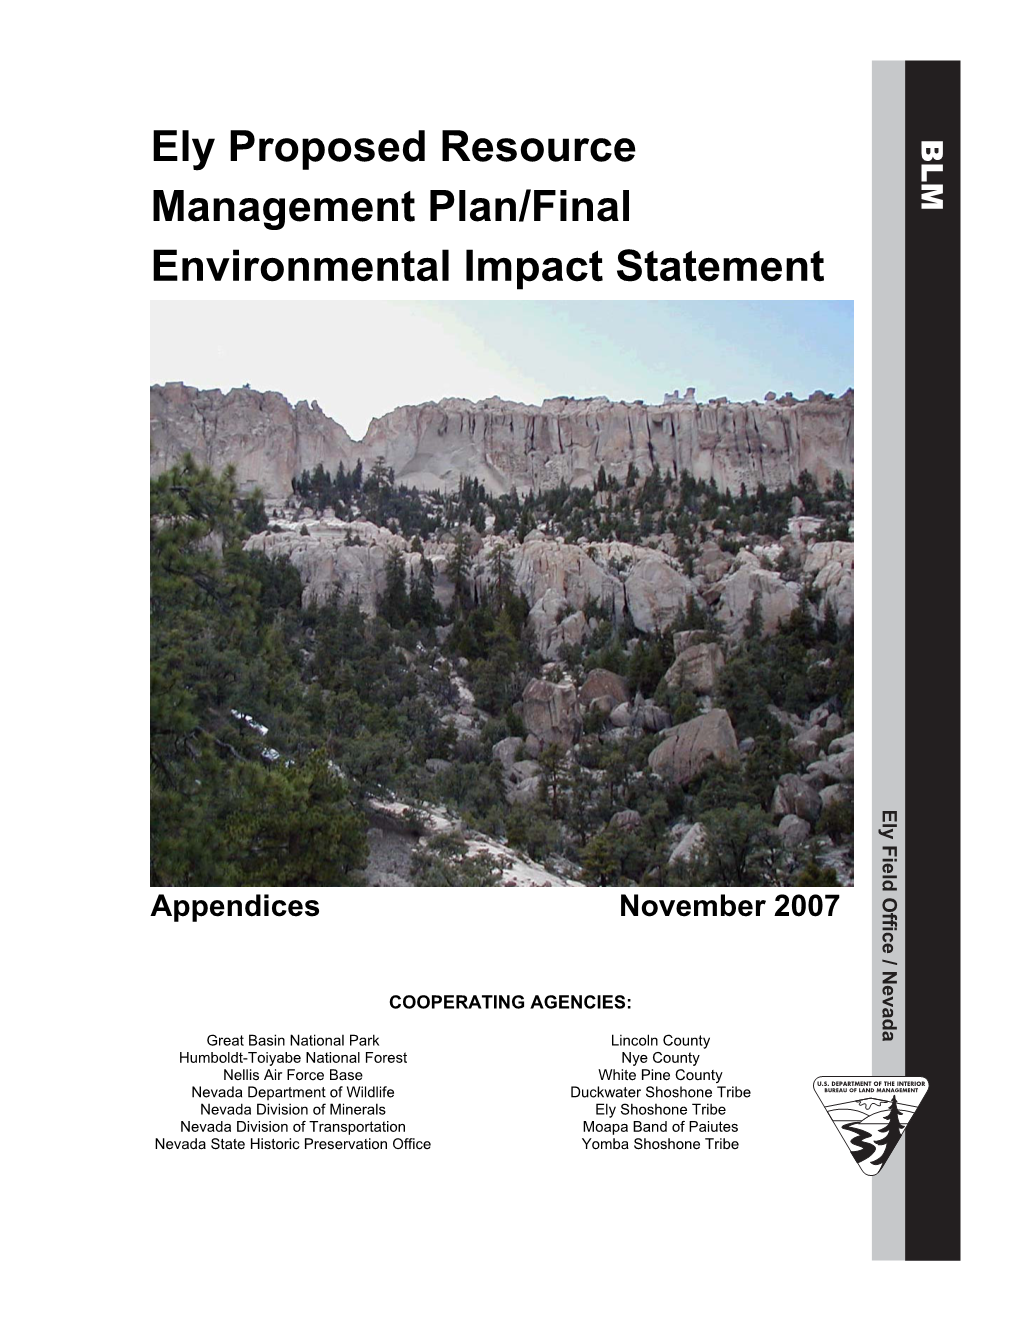 Proposed Resource Management Plan/Final Environmental Impact Statement for the Ely District